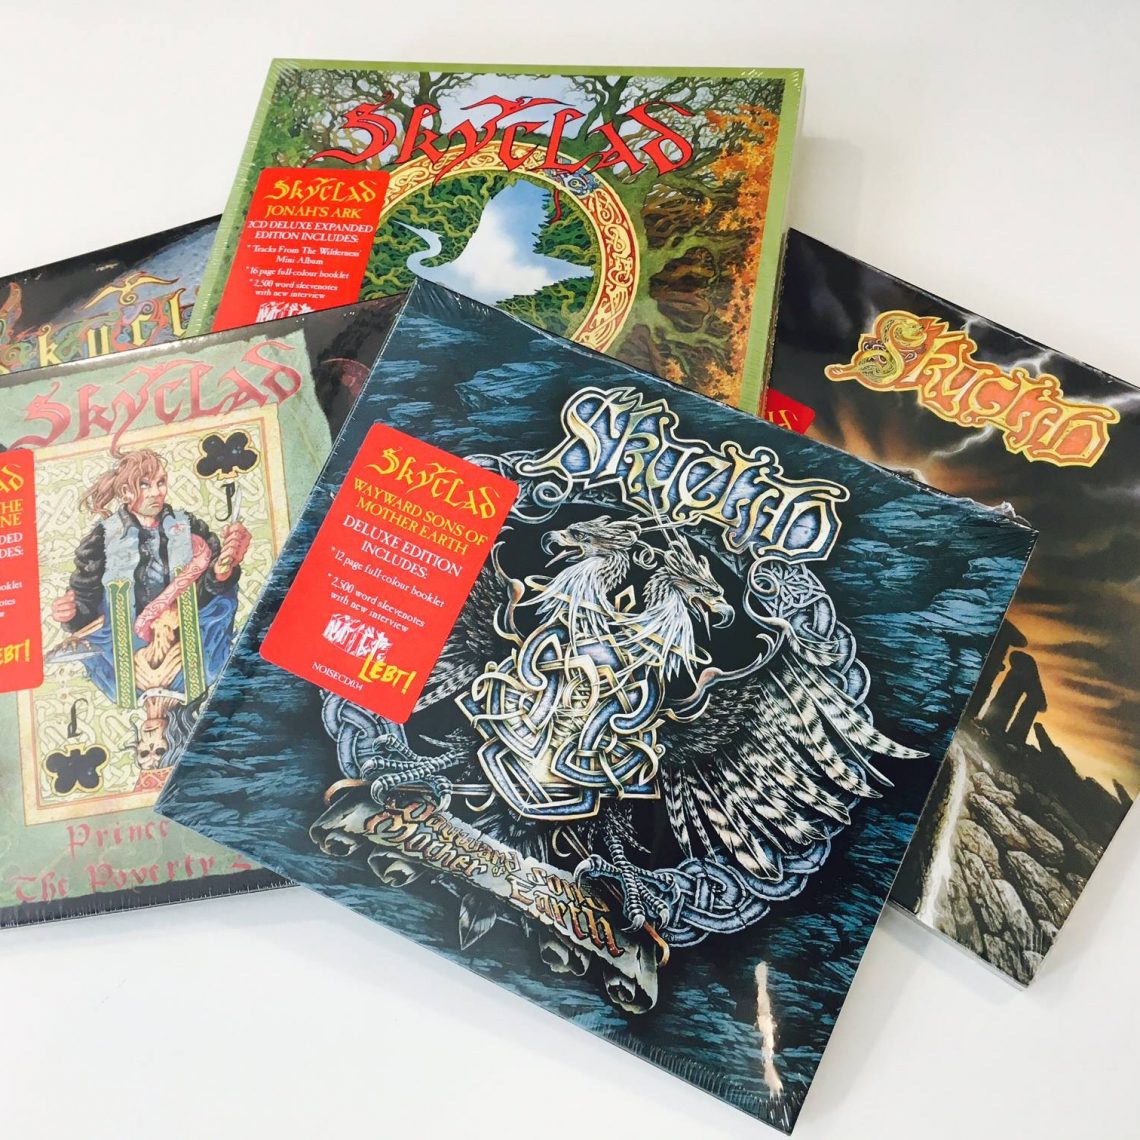 Skyclad – Noise Records re-issues